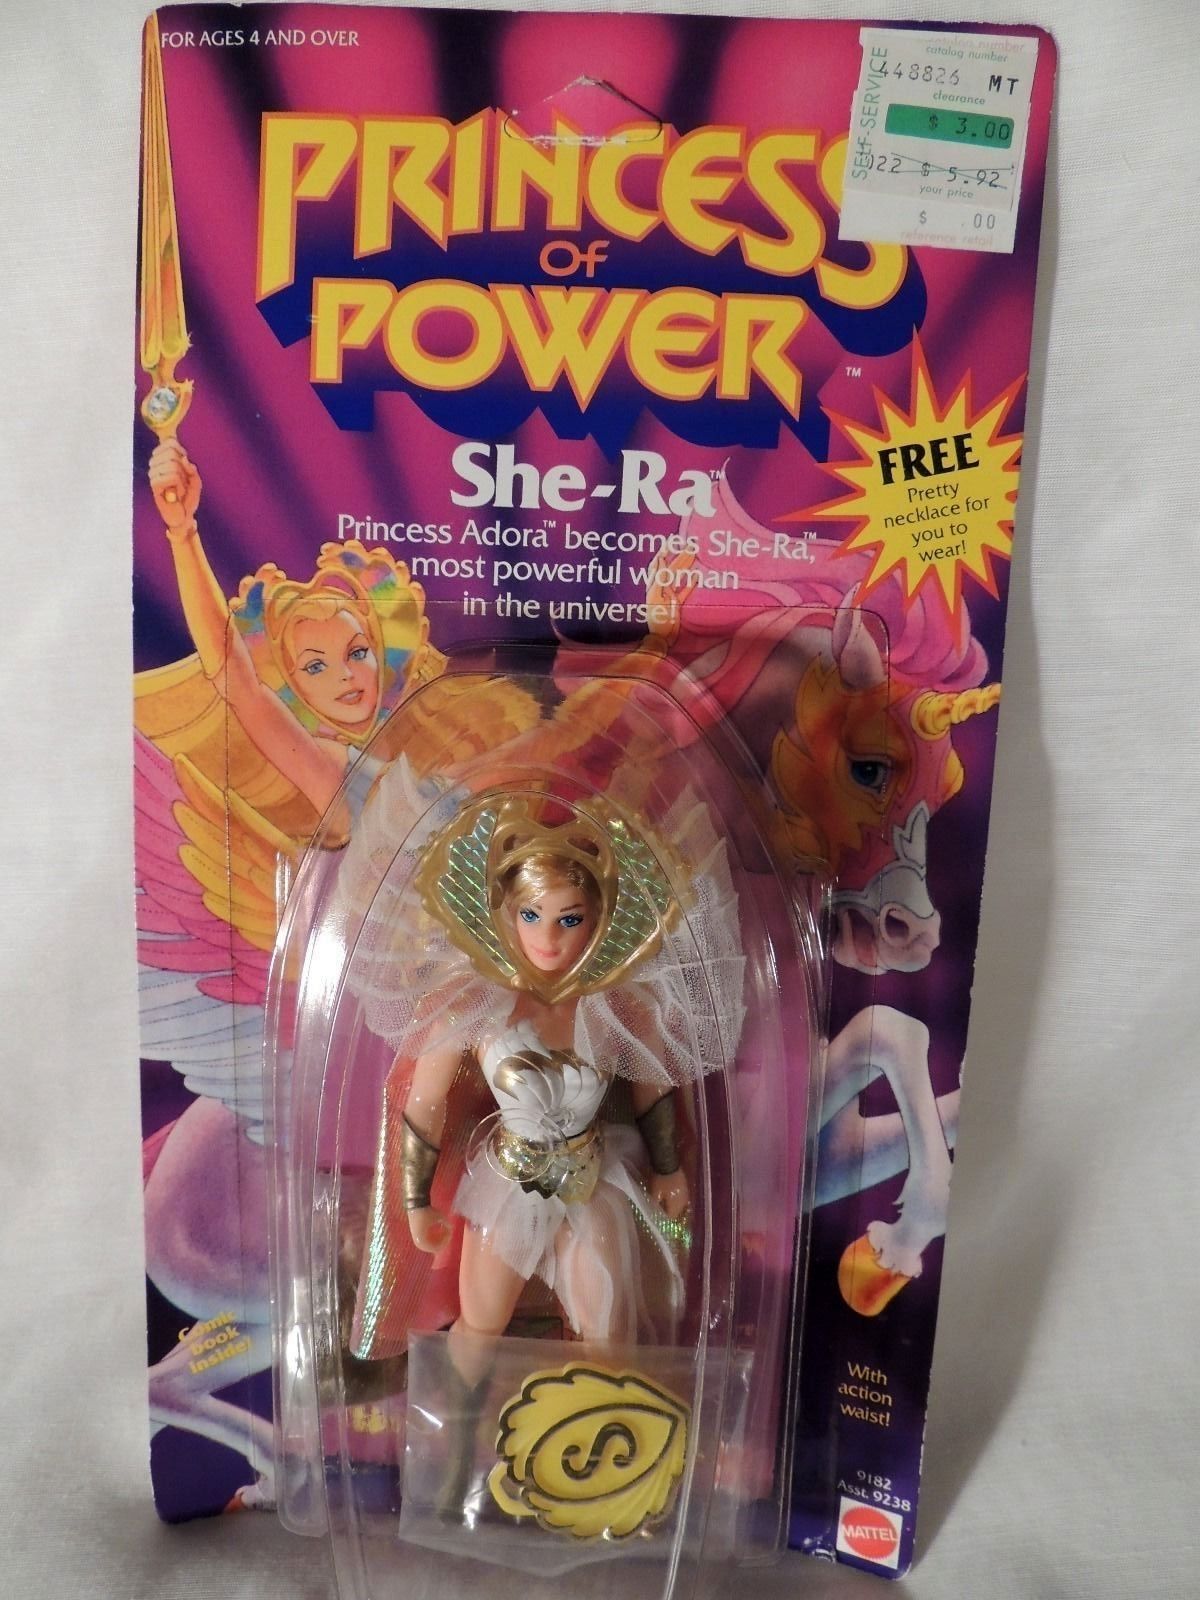 She-Ra: Princess of Power (1985) - (figures, dolls, toys and objects) 35